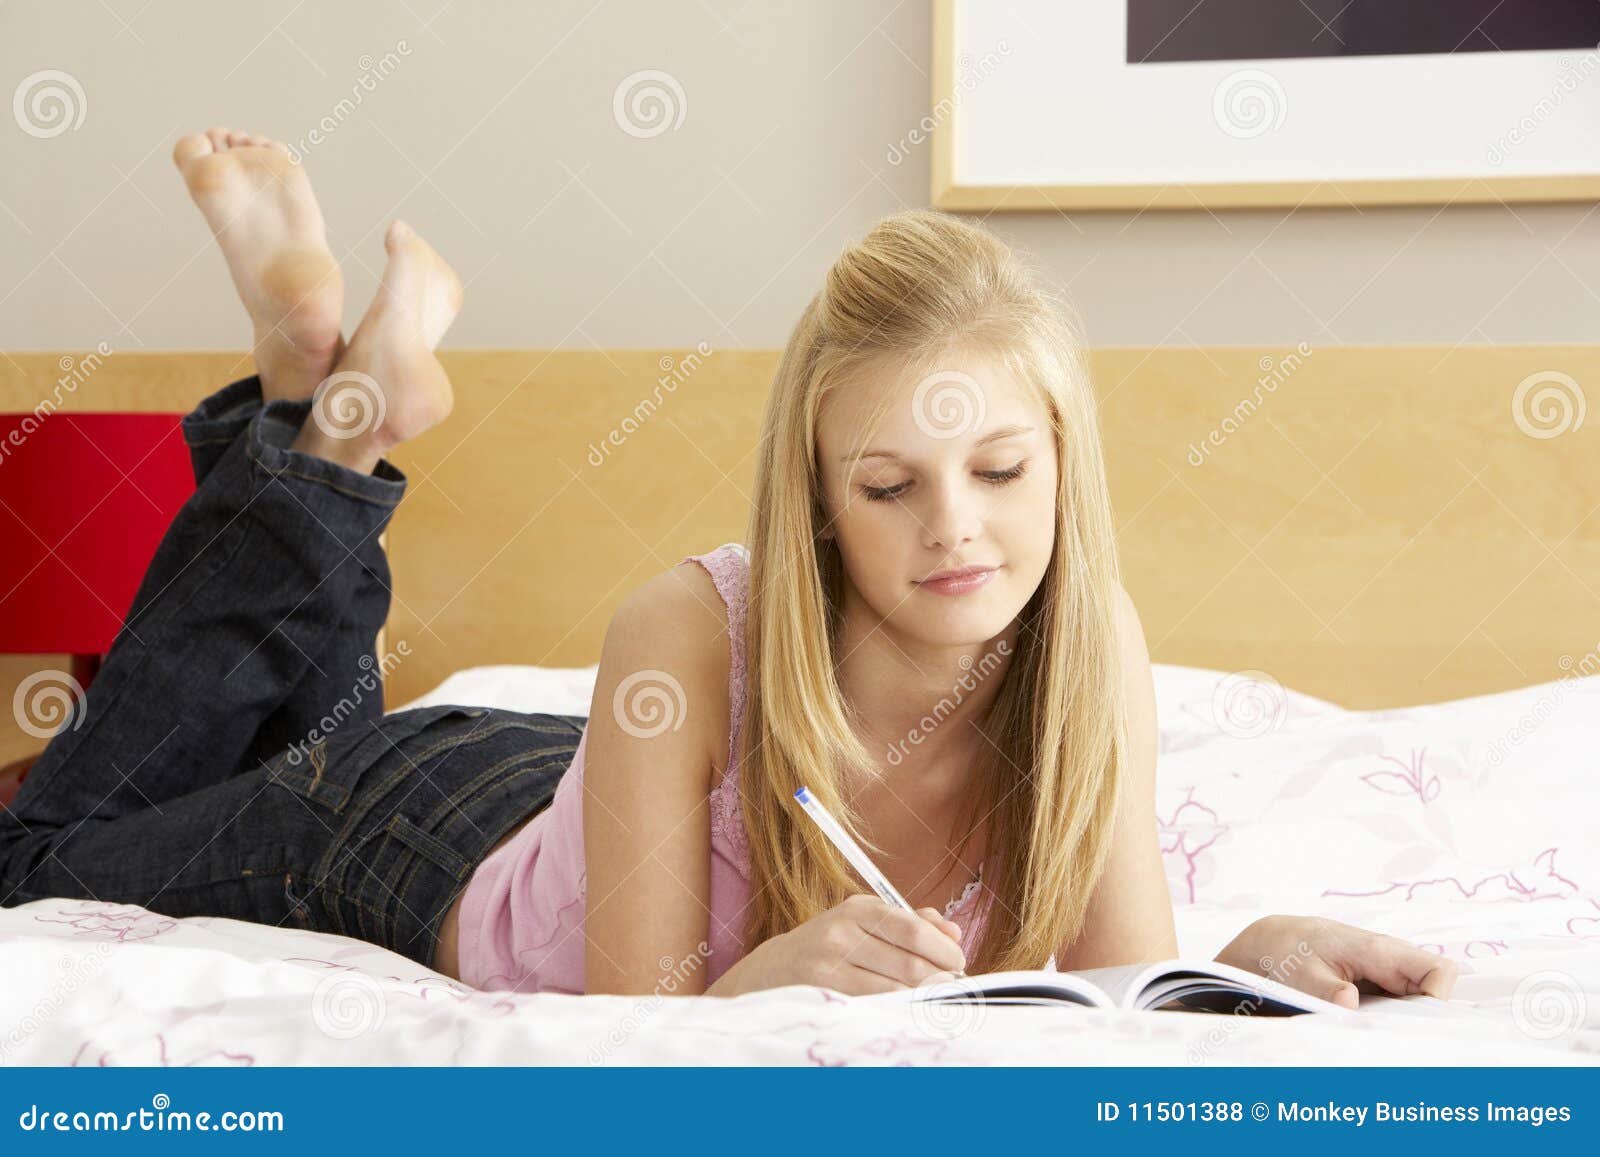  In Diary In Bedroom Royalty Free Stock Photos - Image: 11501388